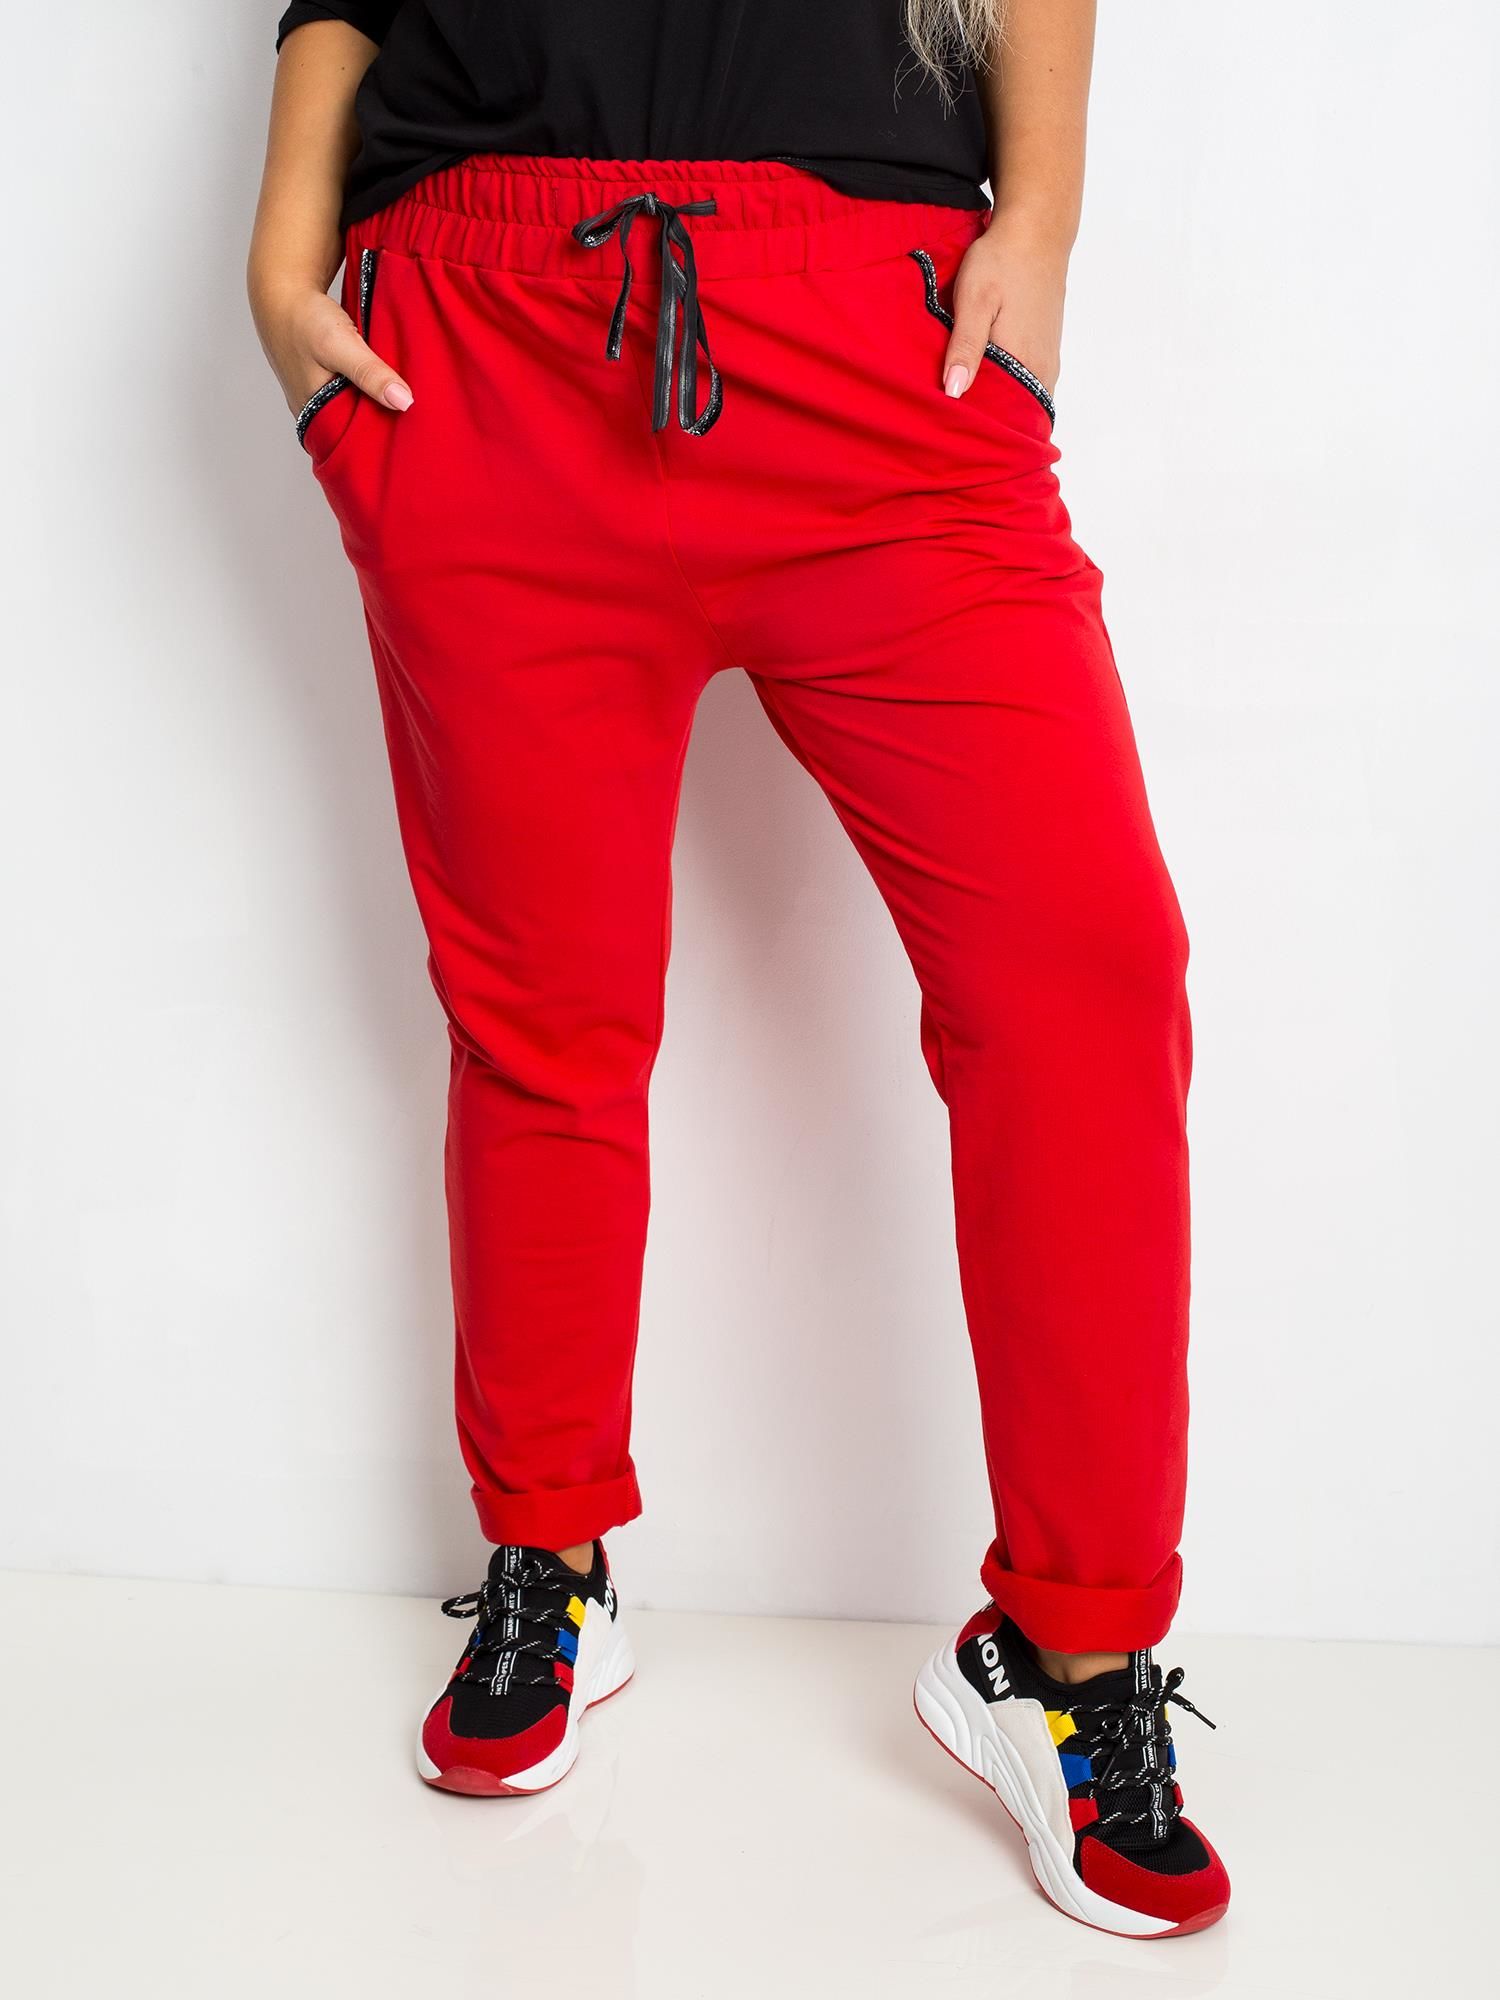 Savage Red Oversized Pants